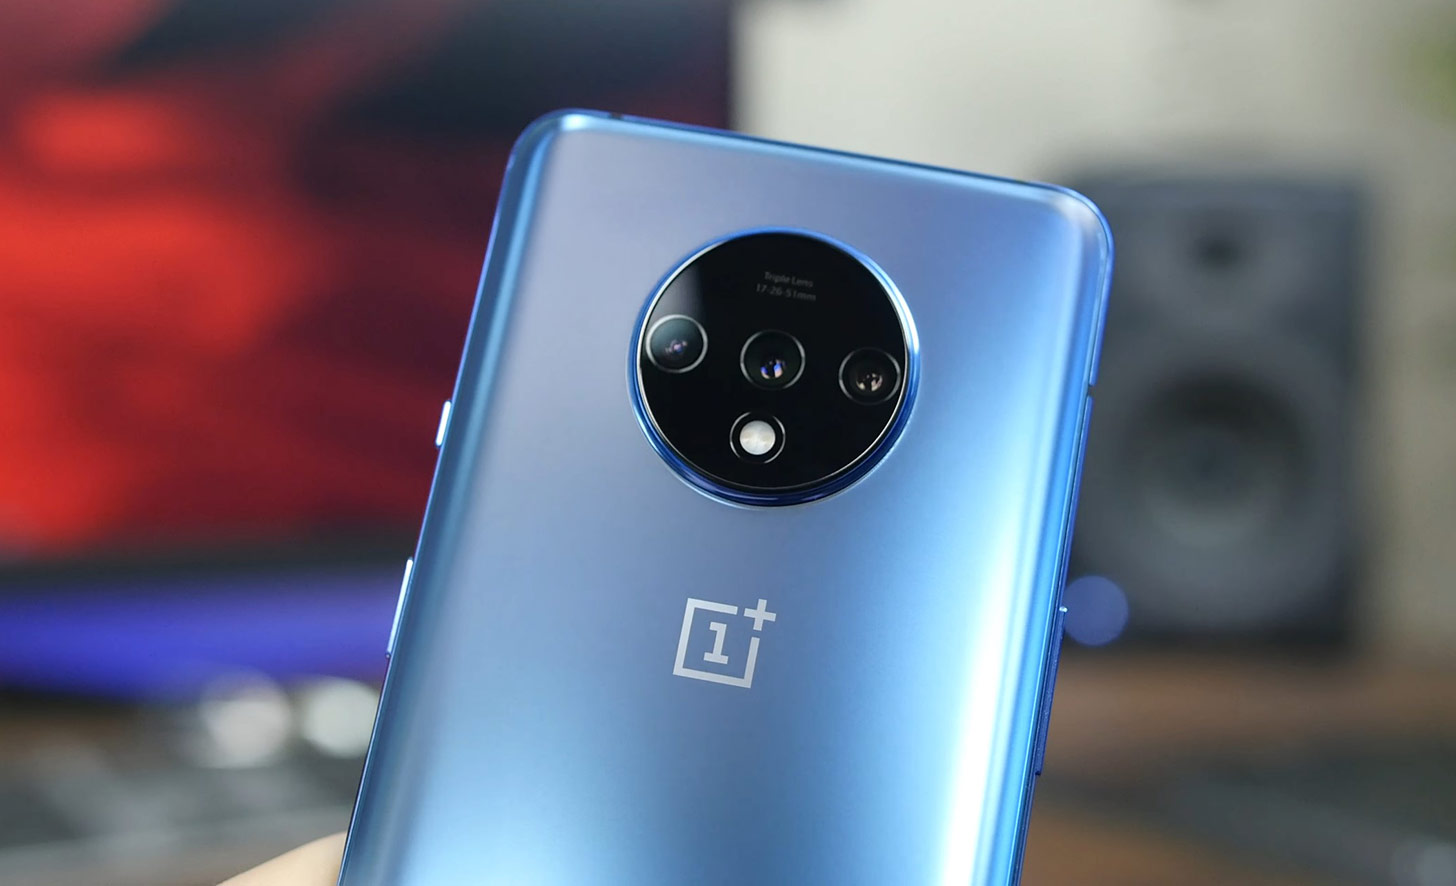 OnePlus 7 and 7T updates to Android 11 have been delayed